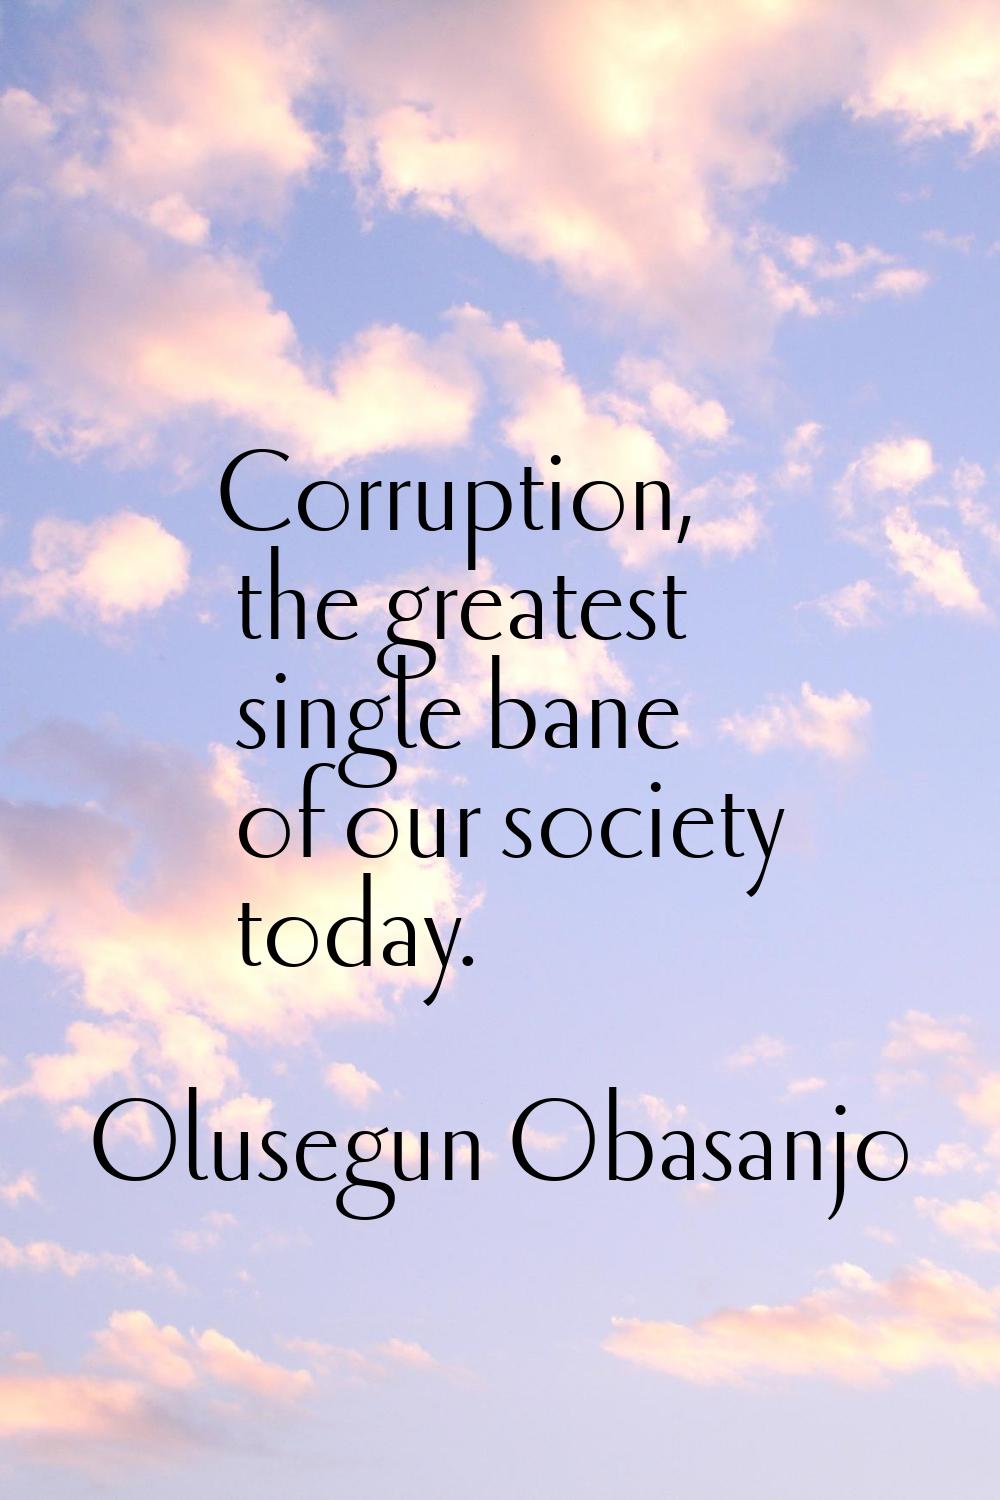 Corruption, the greatest single bane of our society today.